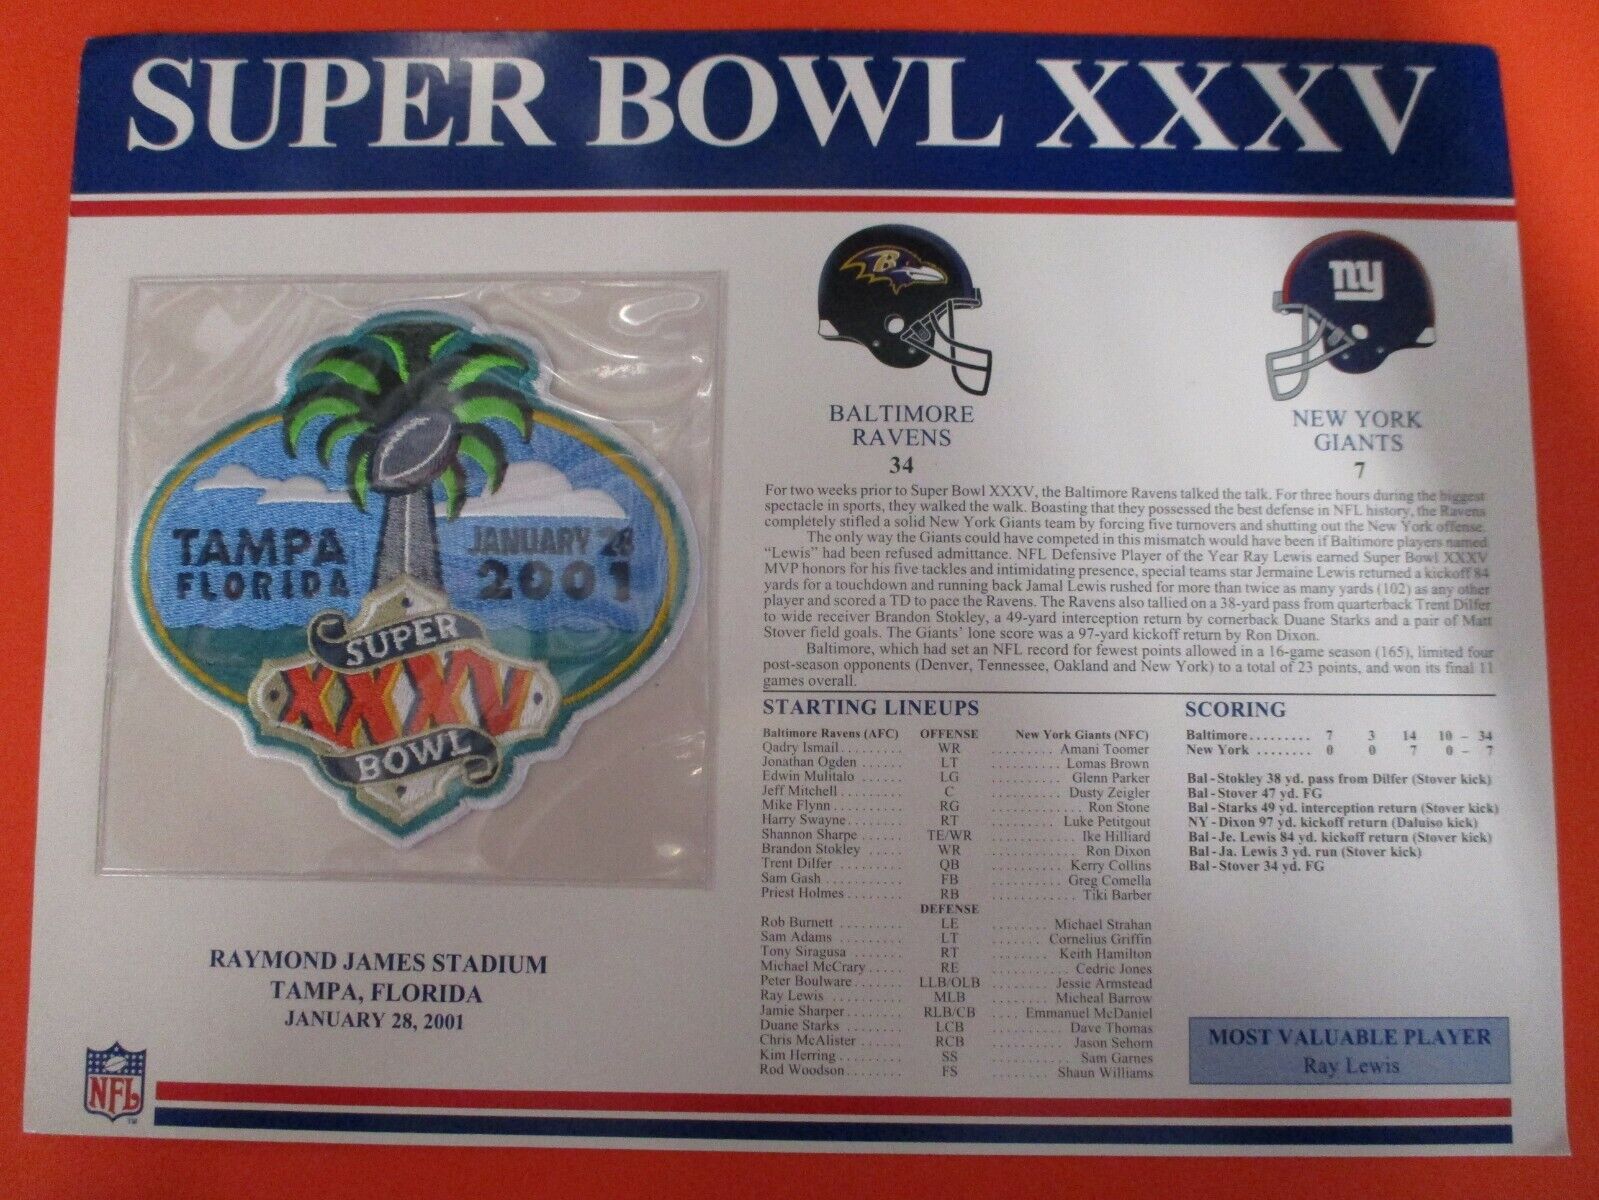 Super Bowl 35 XXXV Embroidered Patch ~4 Inch 2001 Ravens vs Giants MVP Lewis